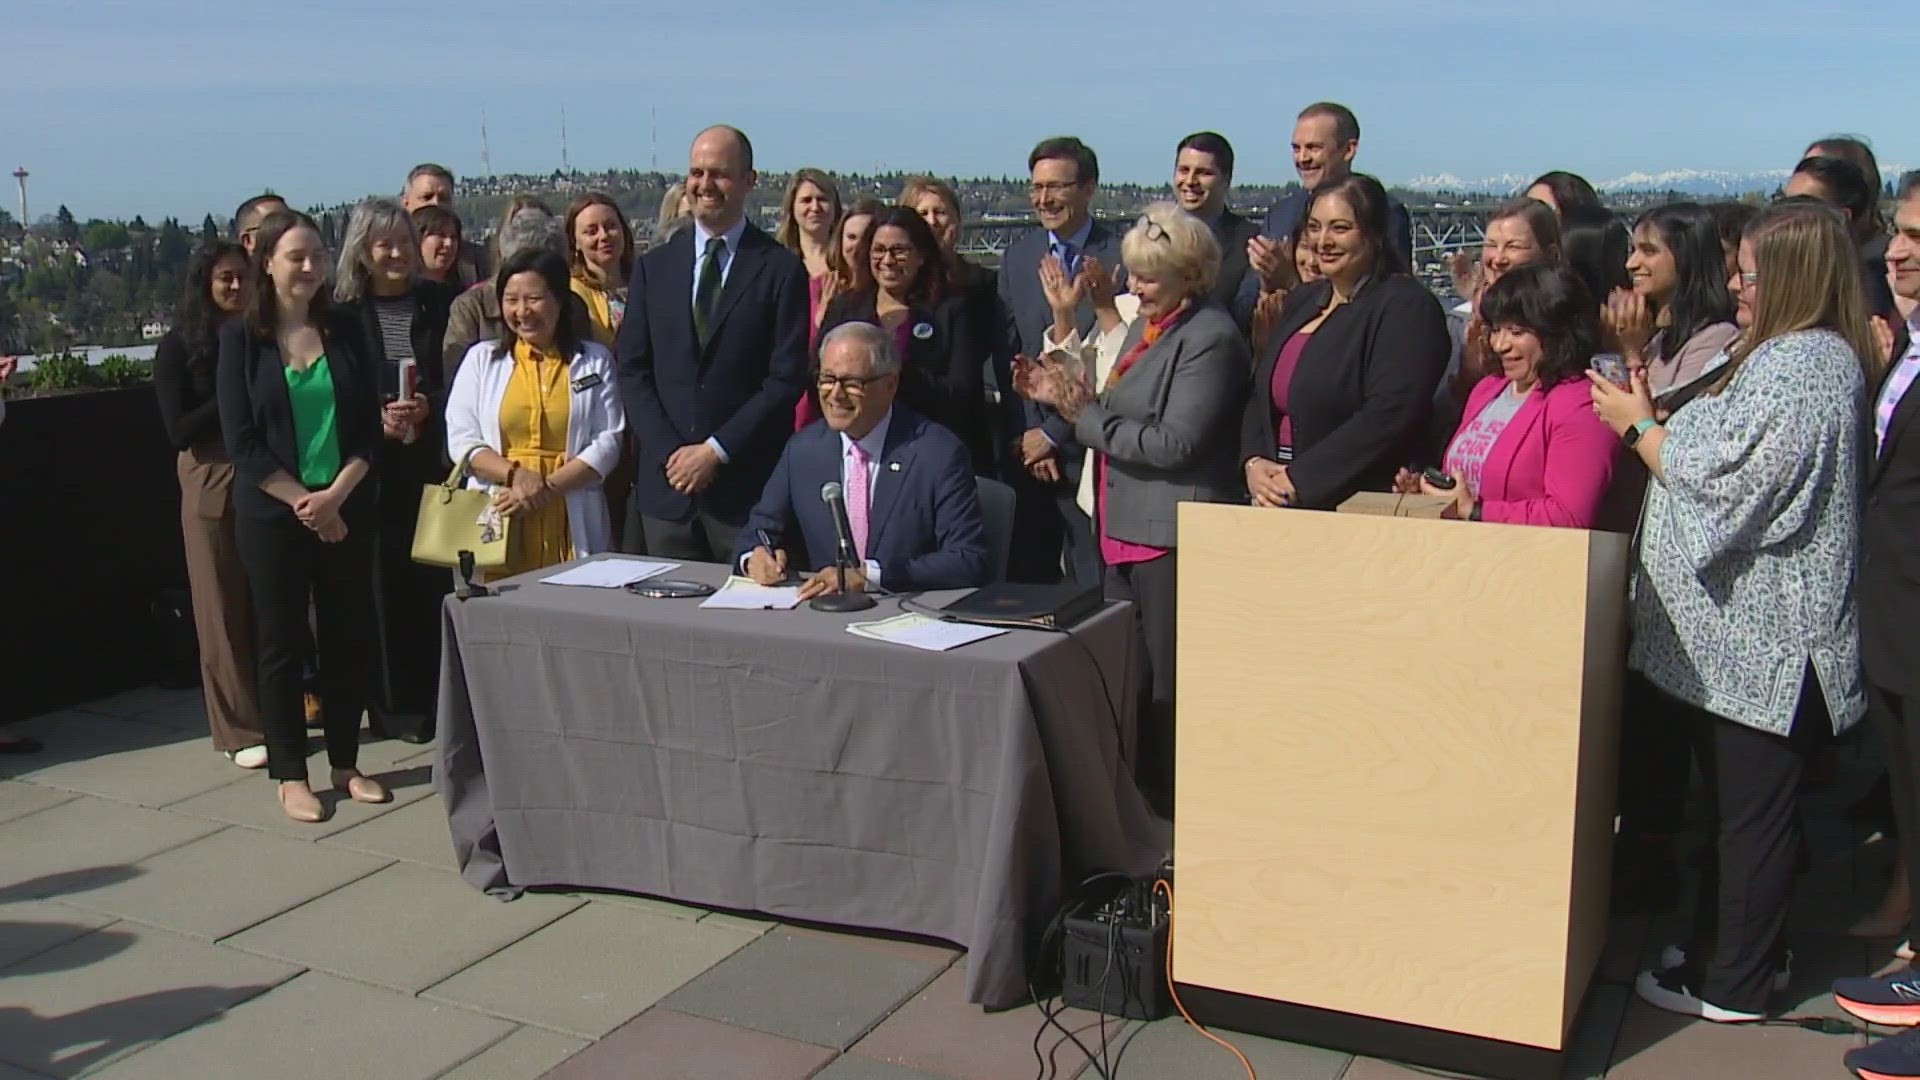 Gov. Jay Inslee signed a number of bills Thursday that will protect access to abortion and reproductive care in Washington state.